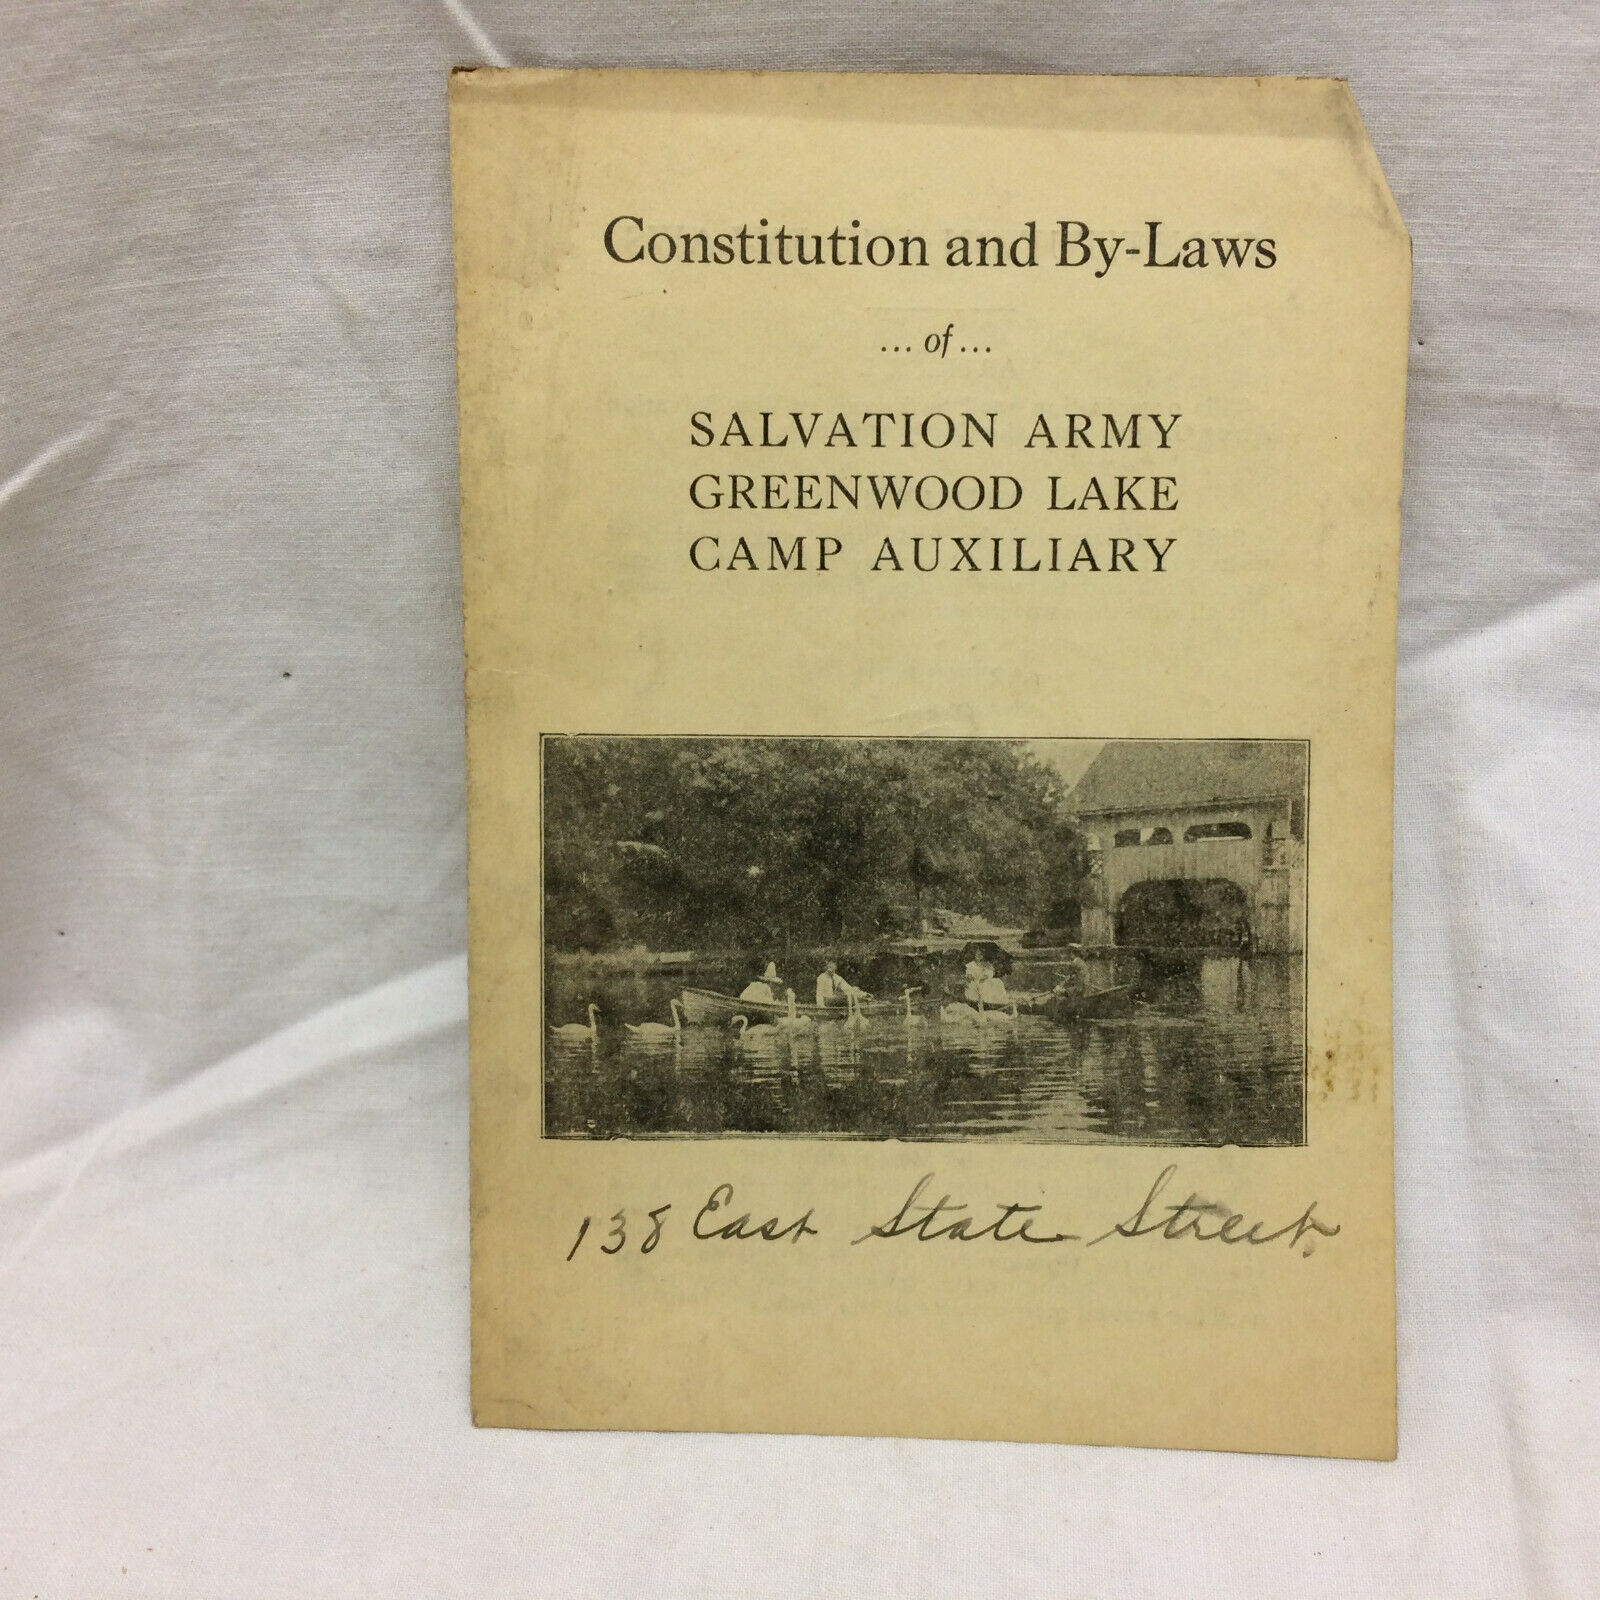 Vintage Salvation Army Leaflet Greenwood Lake Camp Auxiliary